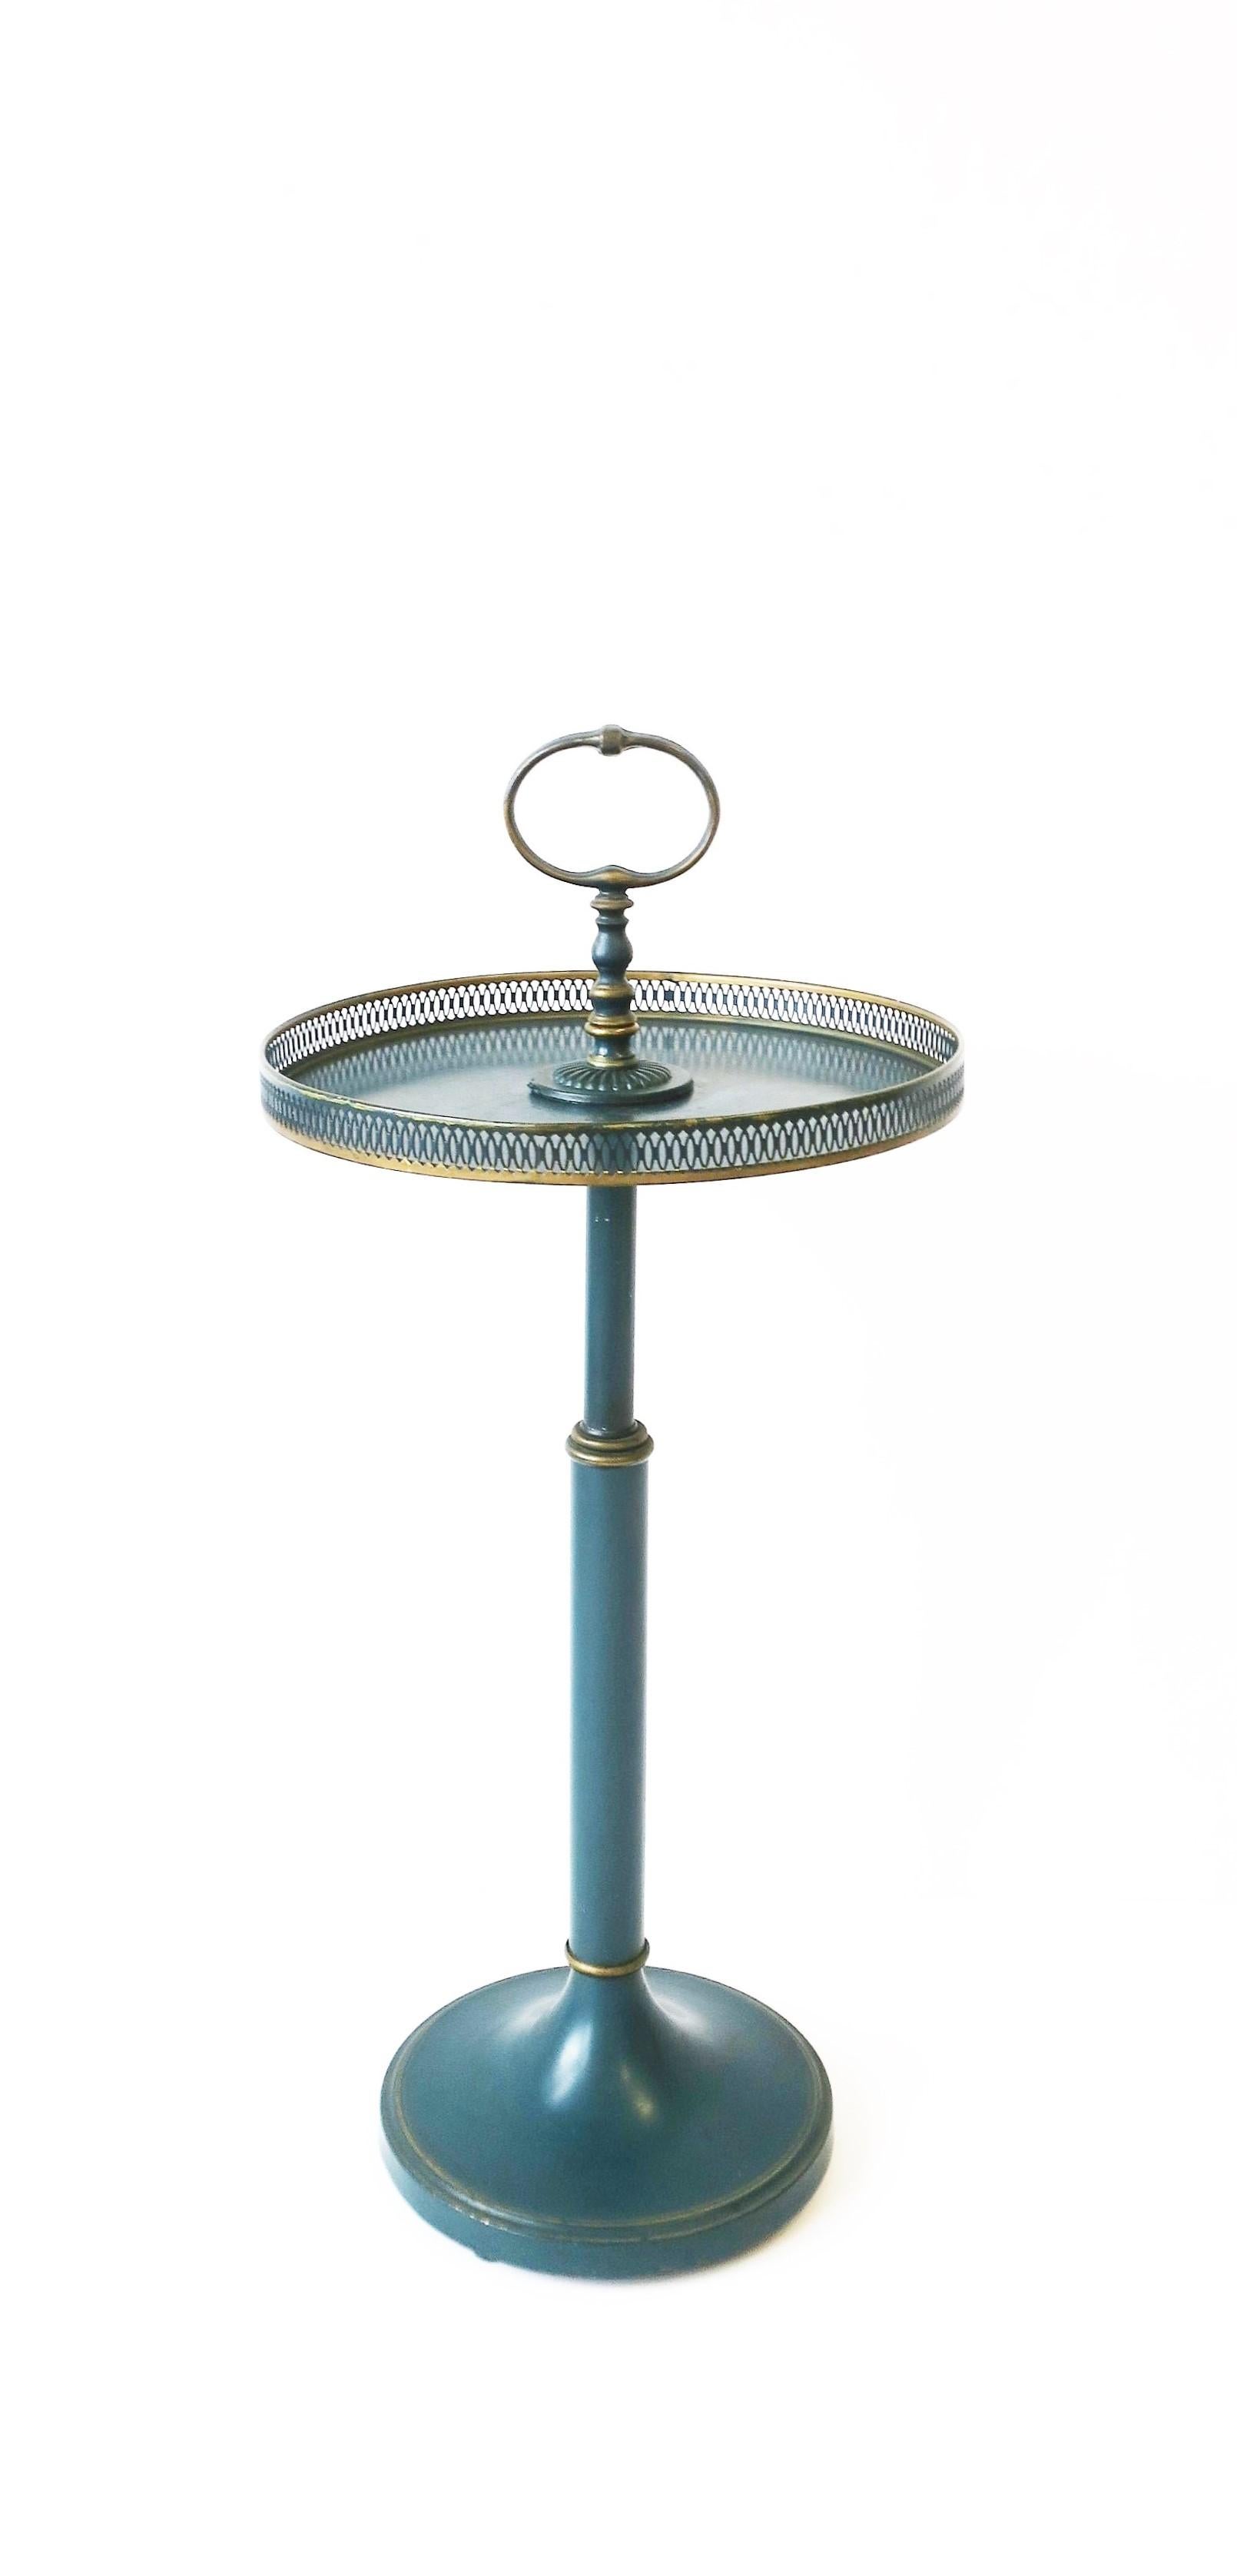 A Tole metal side table with loop handle and gallery edge in blue with gold detail, circa early to mid-20th century. 

Dimensions:
27.5